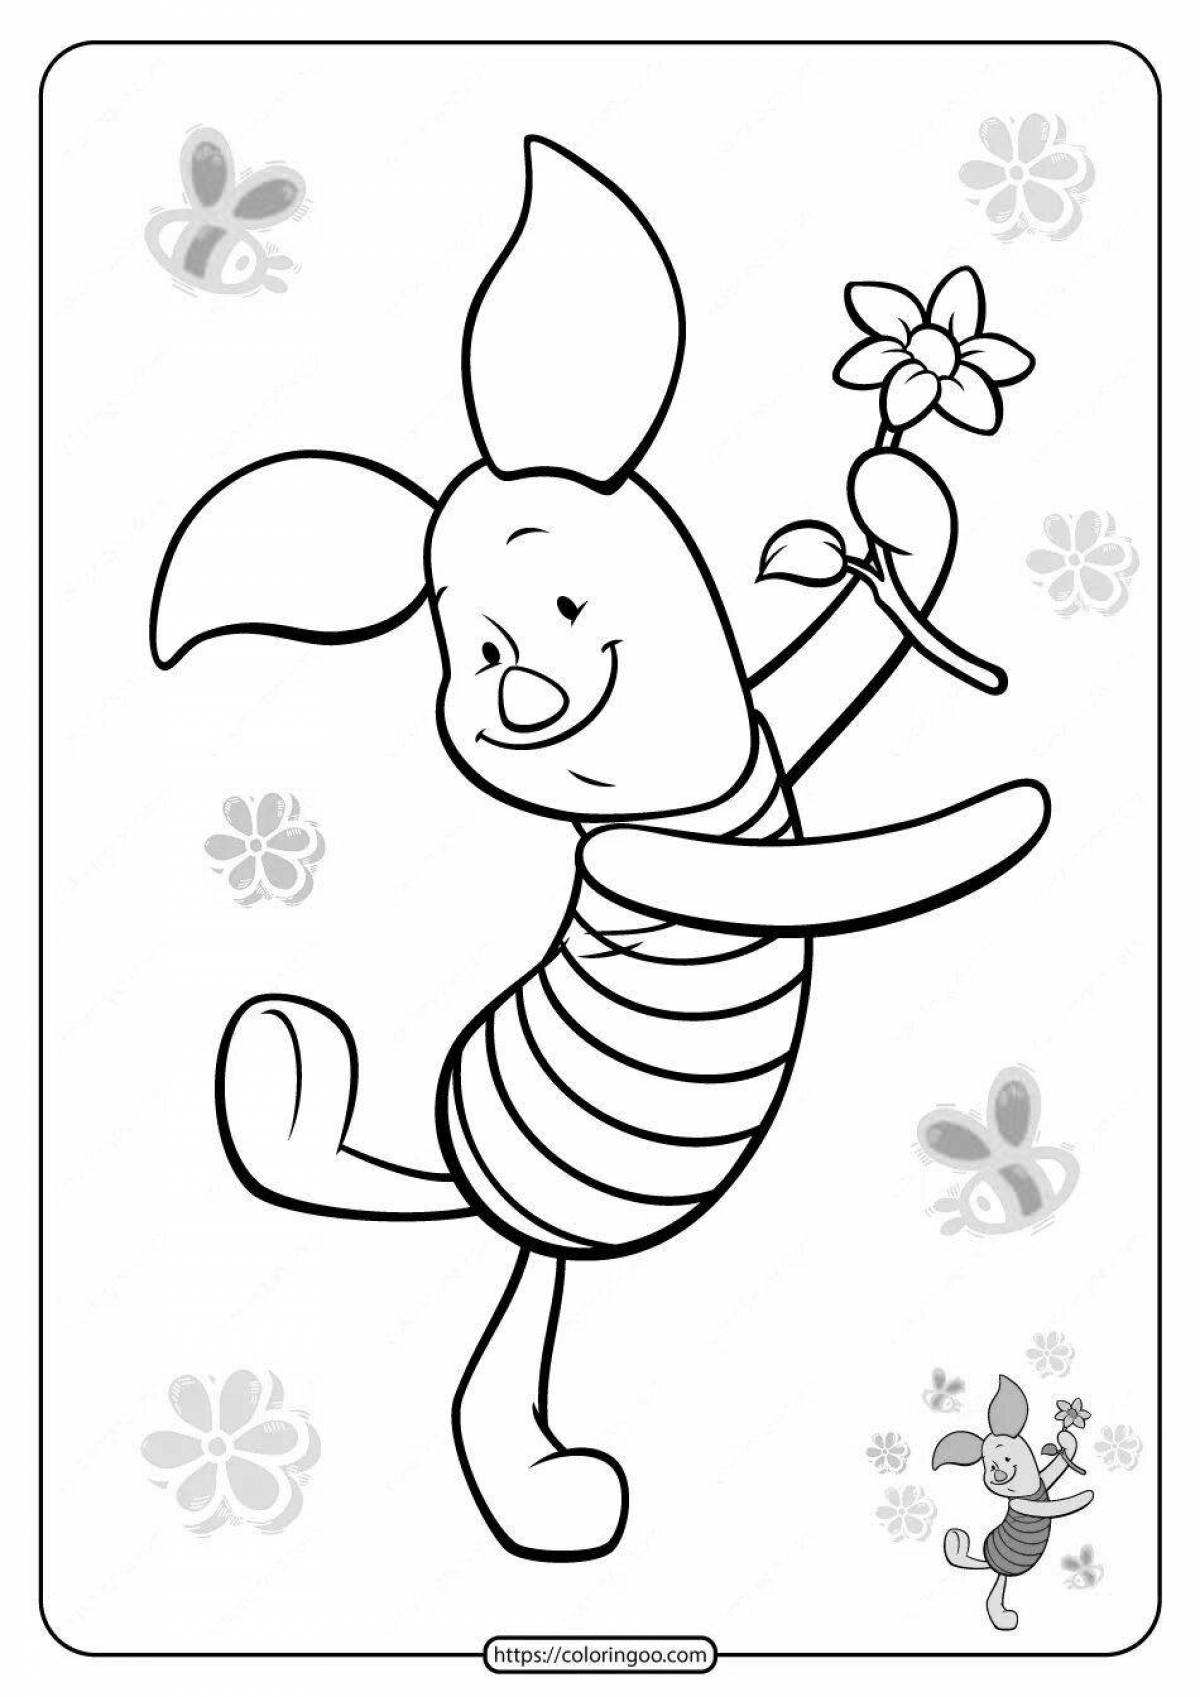 Amazing cartoon characters coloring pages for kids